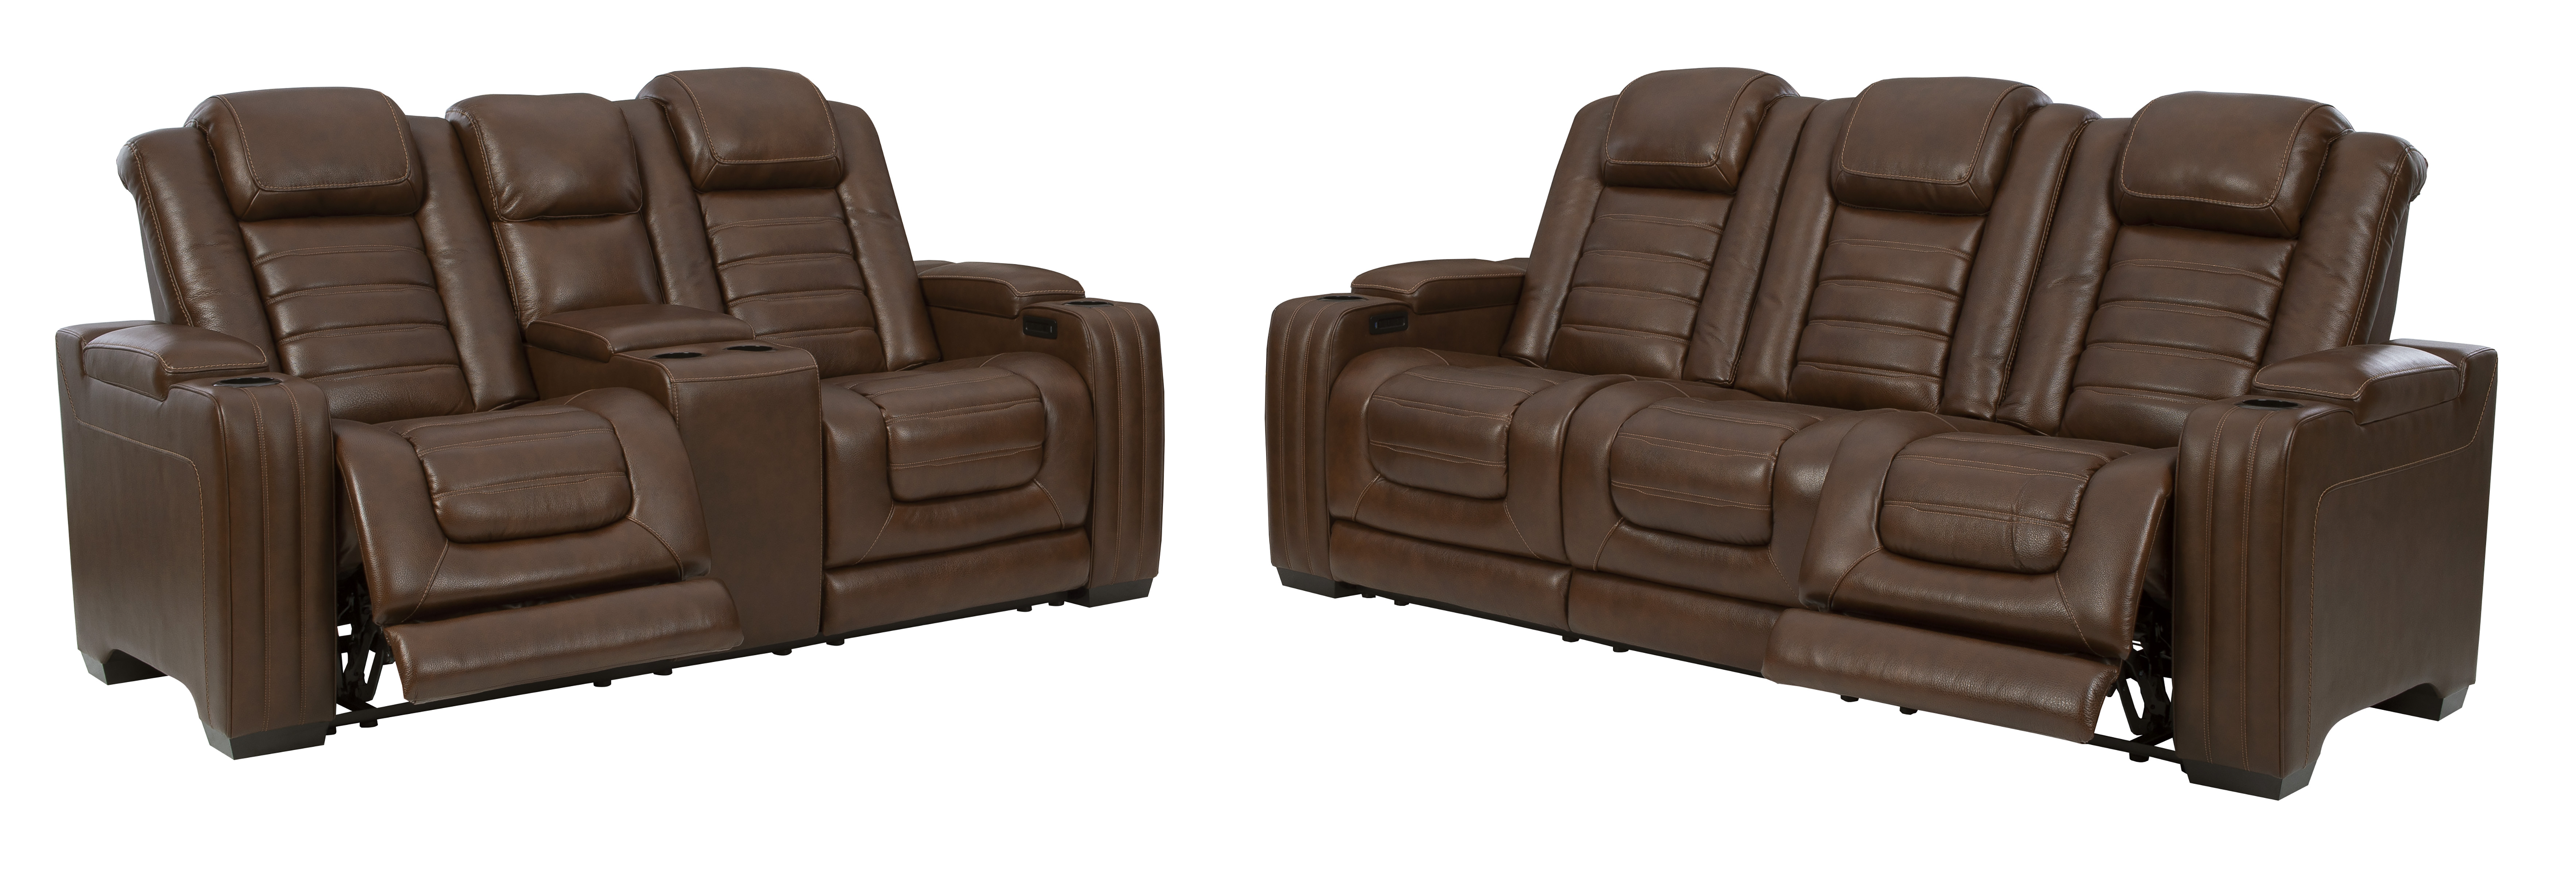 backtrack 3 piece power reclining sectional